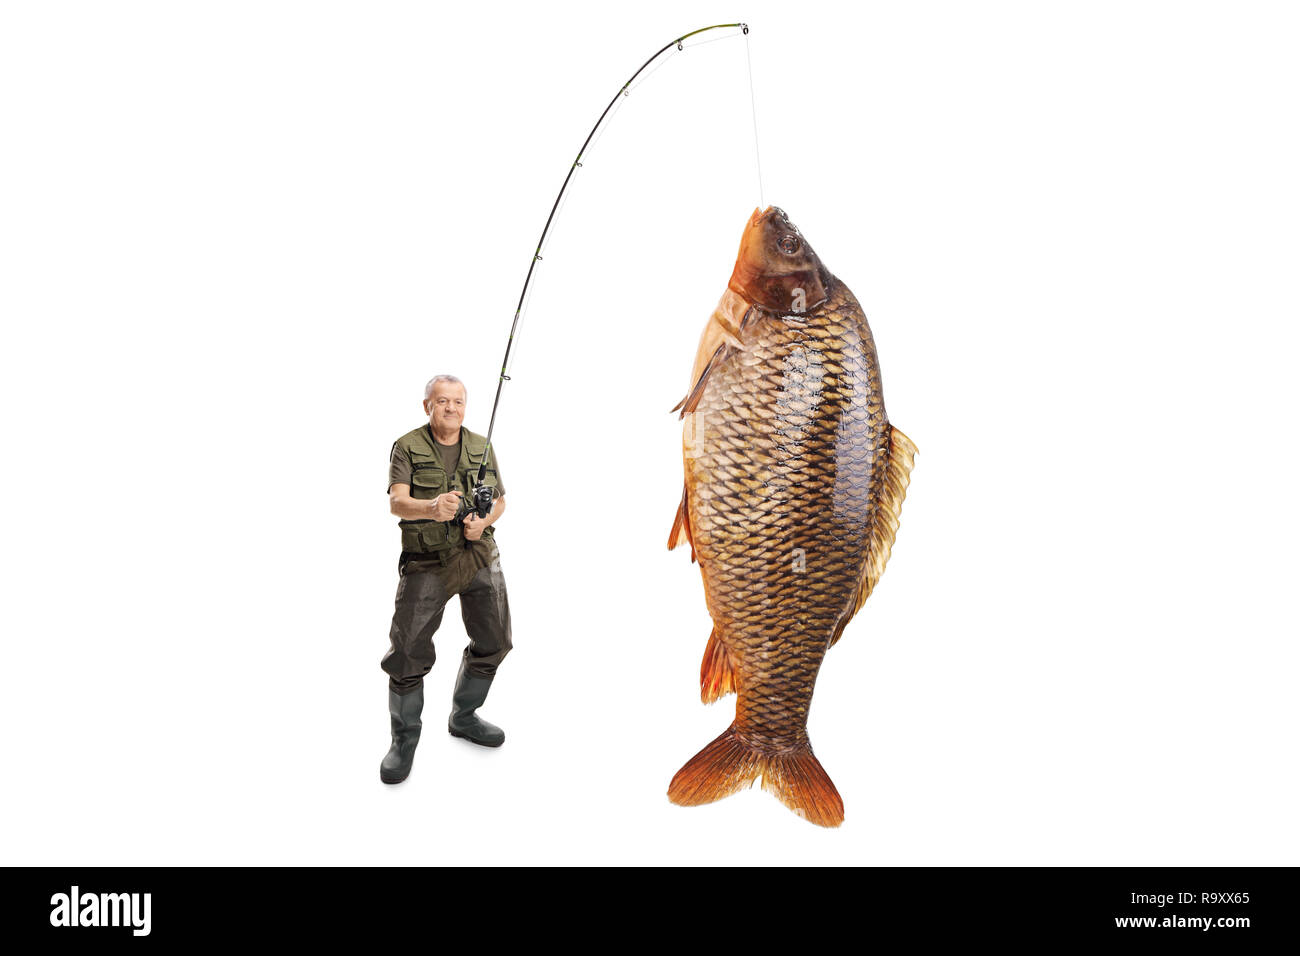 Full length portrait of a mature fisherman with a carp fish on a fishing rod  isolated on white background Stock Photo - Alamy